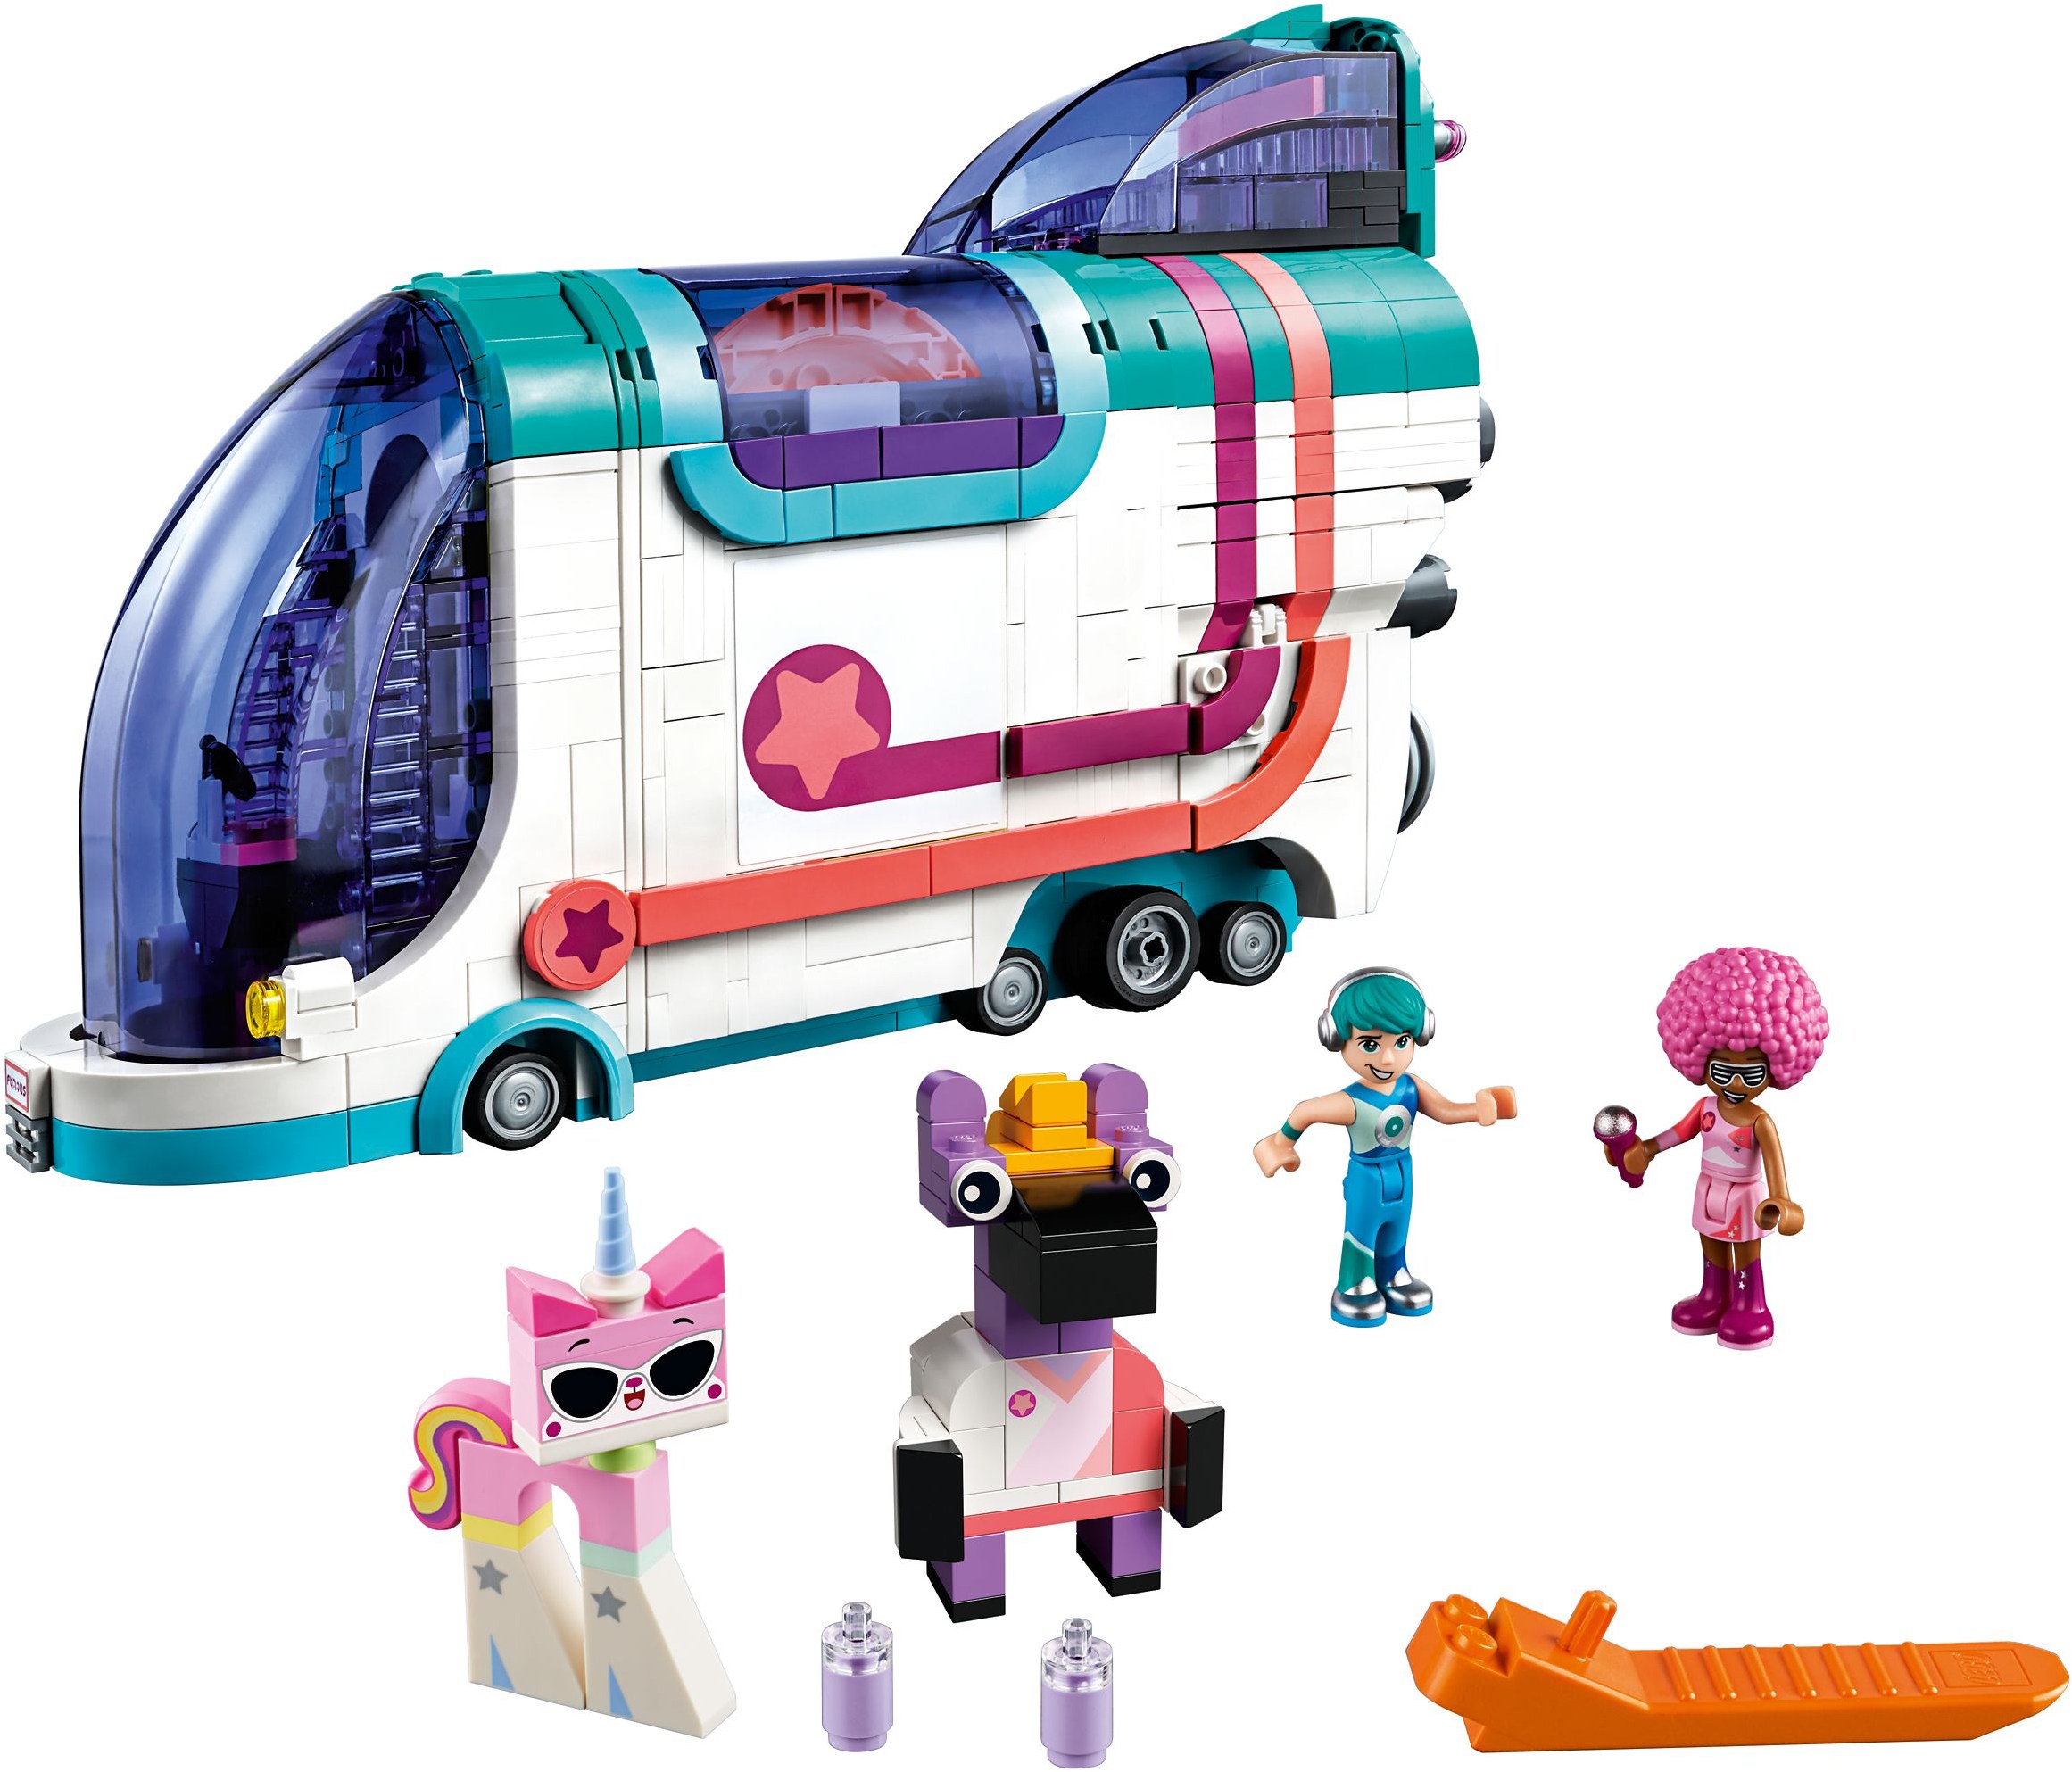 NEW LEGO Melody FROM SET 70828 THE LEGO MOVIE 2 tlm121 